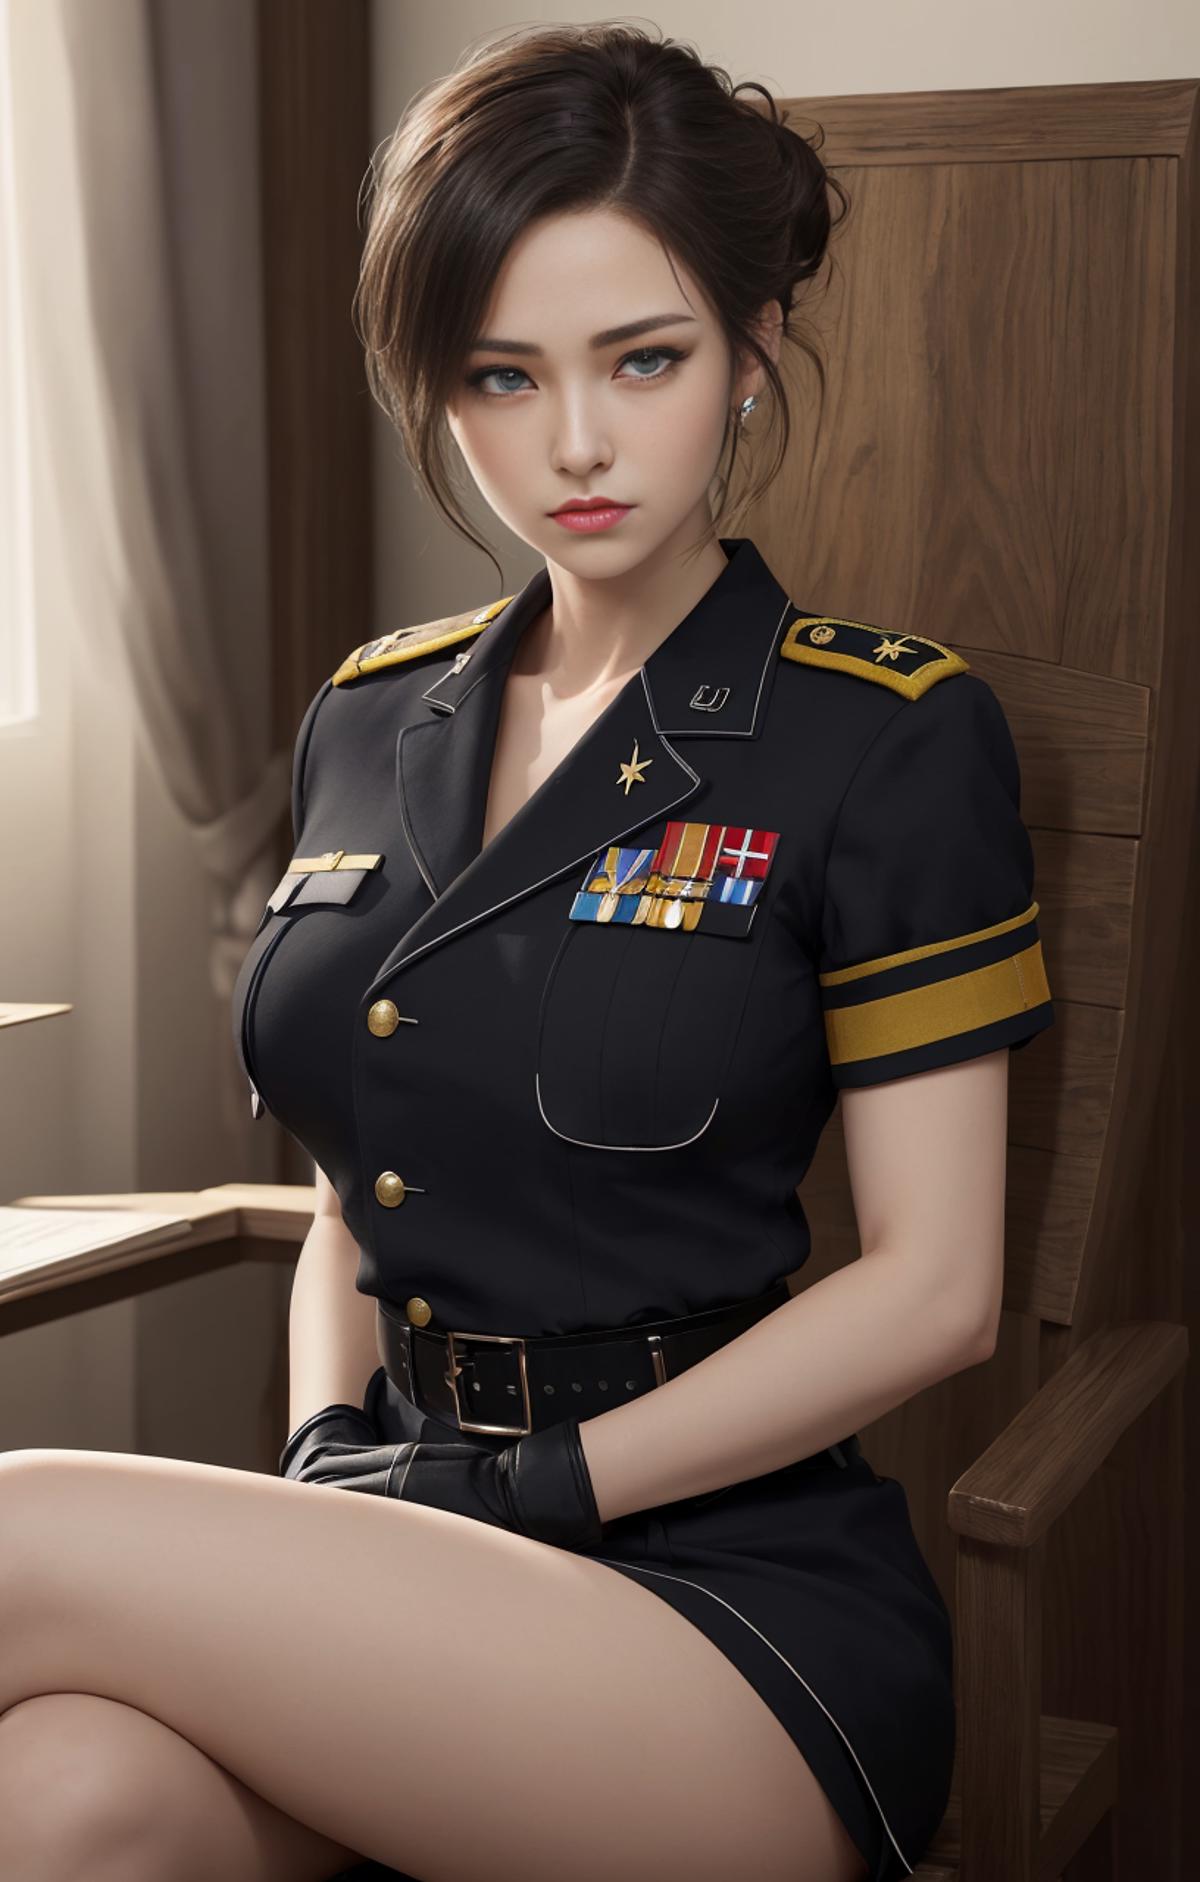 AI model image by Luchs233